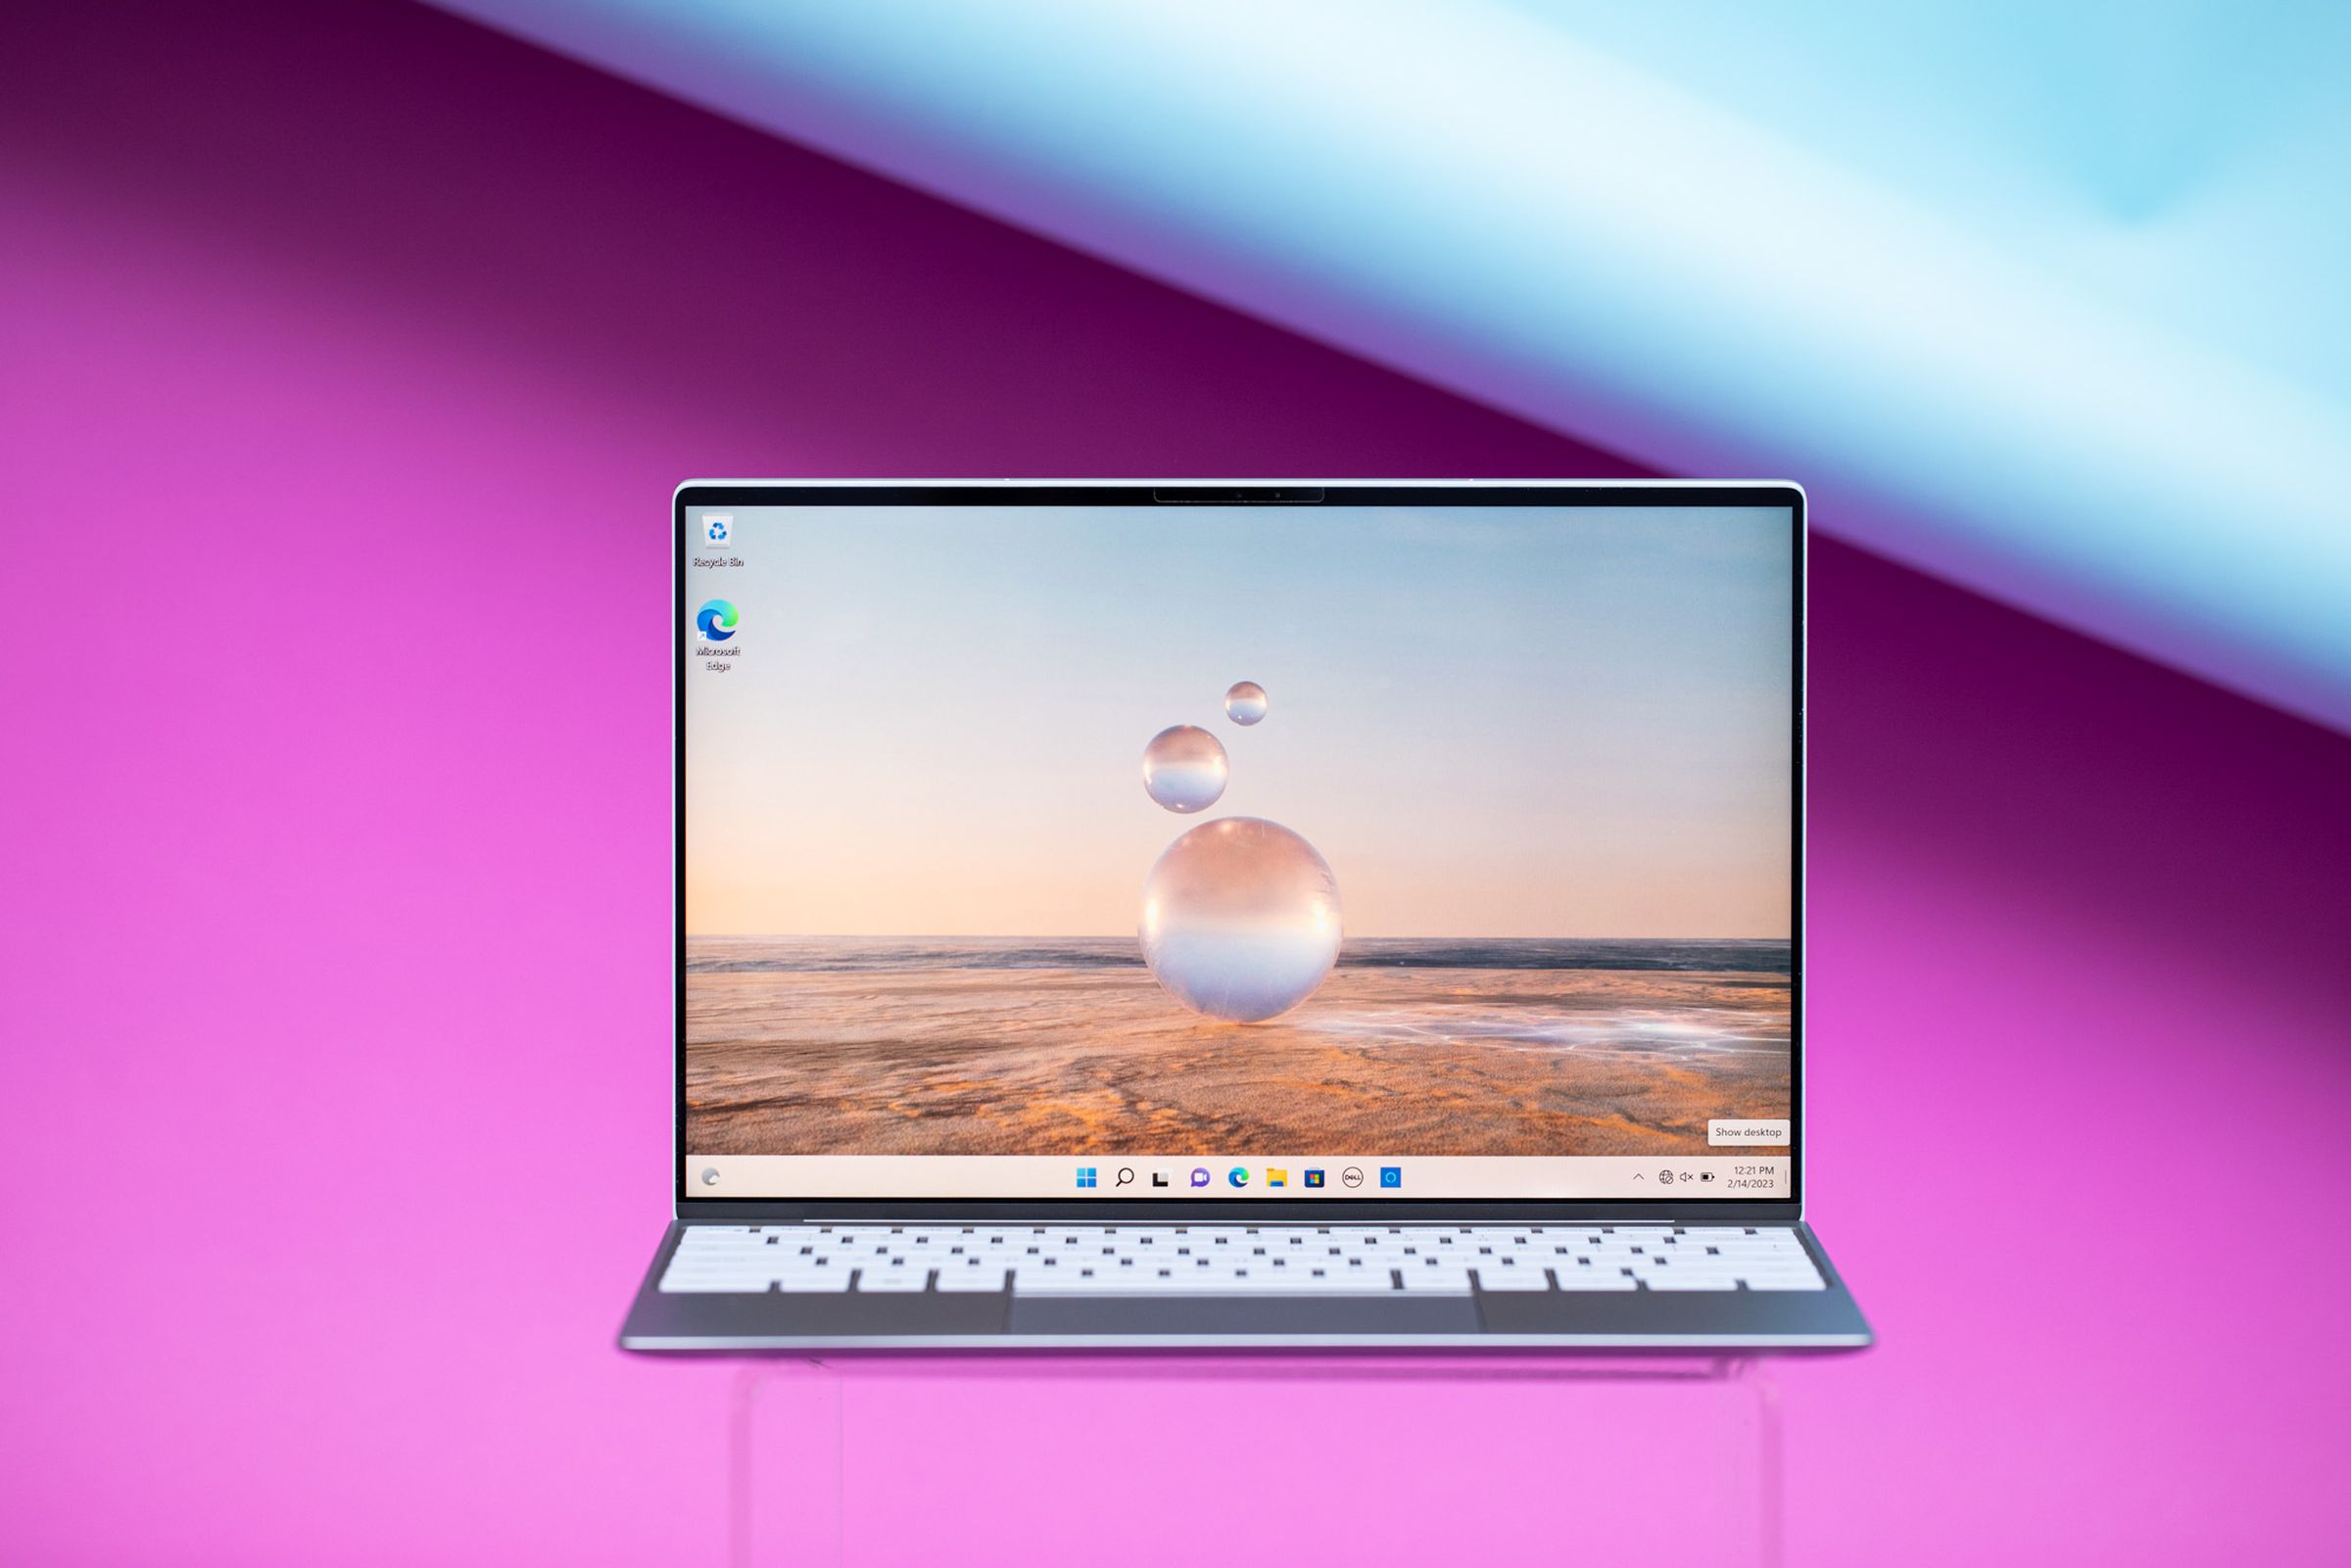 The Dell XPS 13 seen from the front, displaying a desktop background with three bubbles.